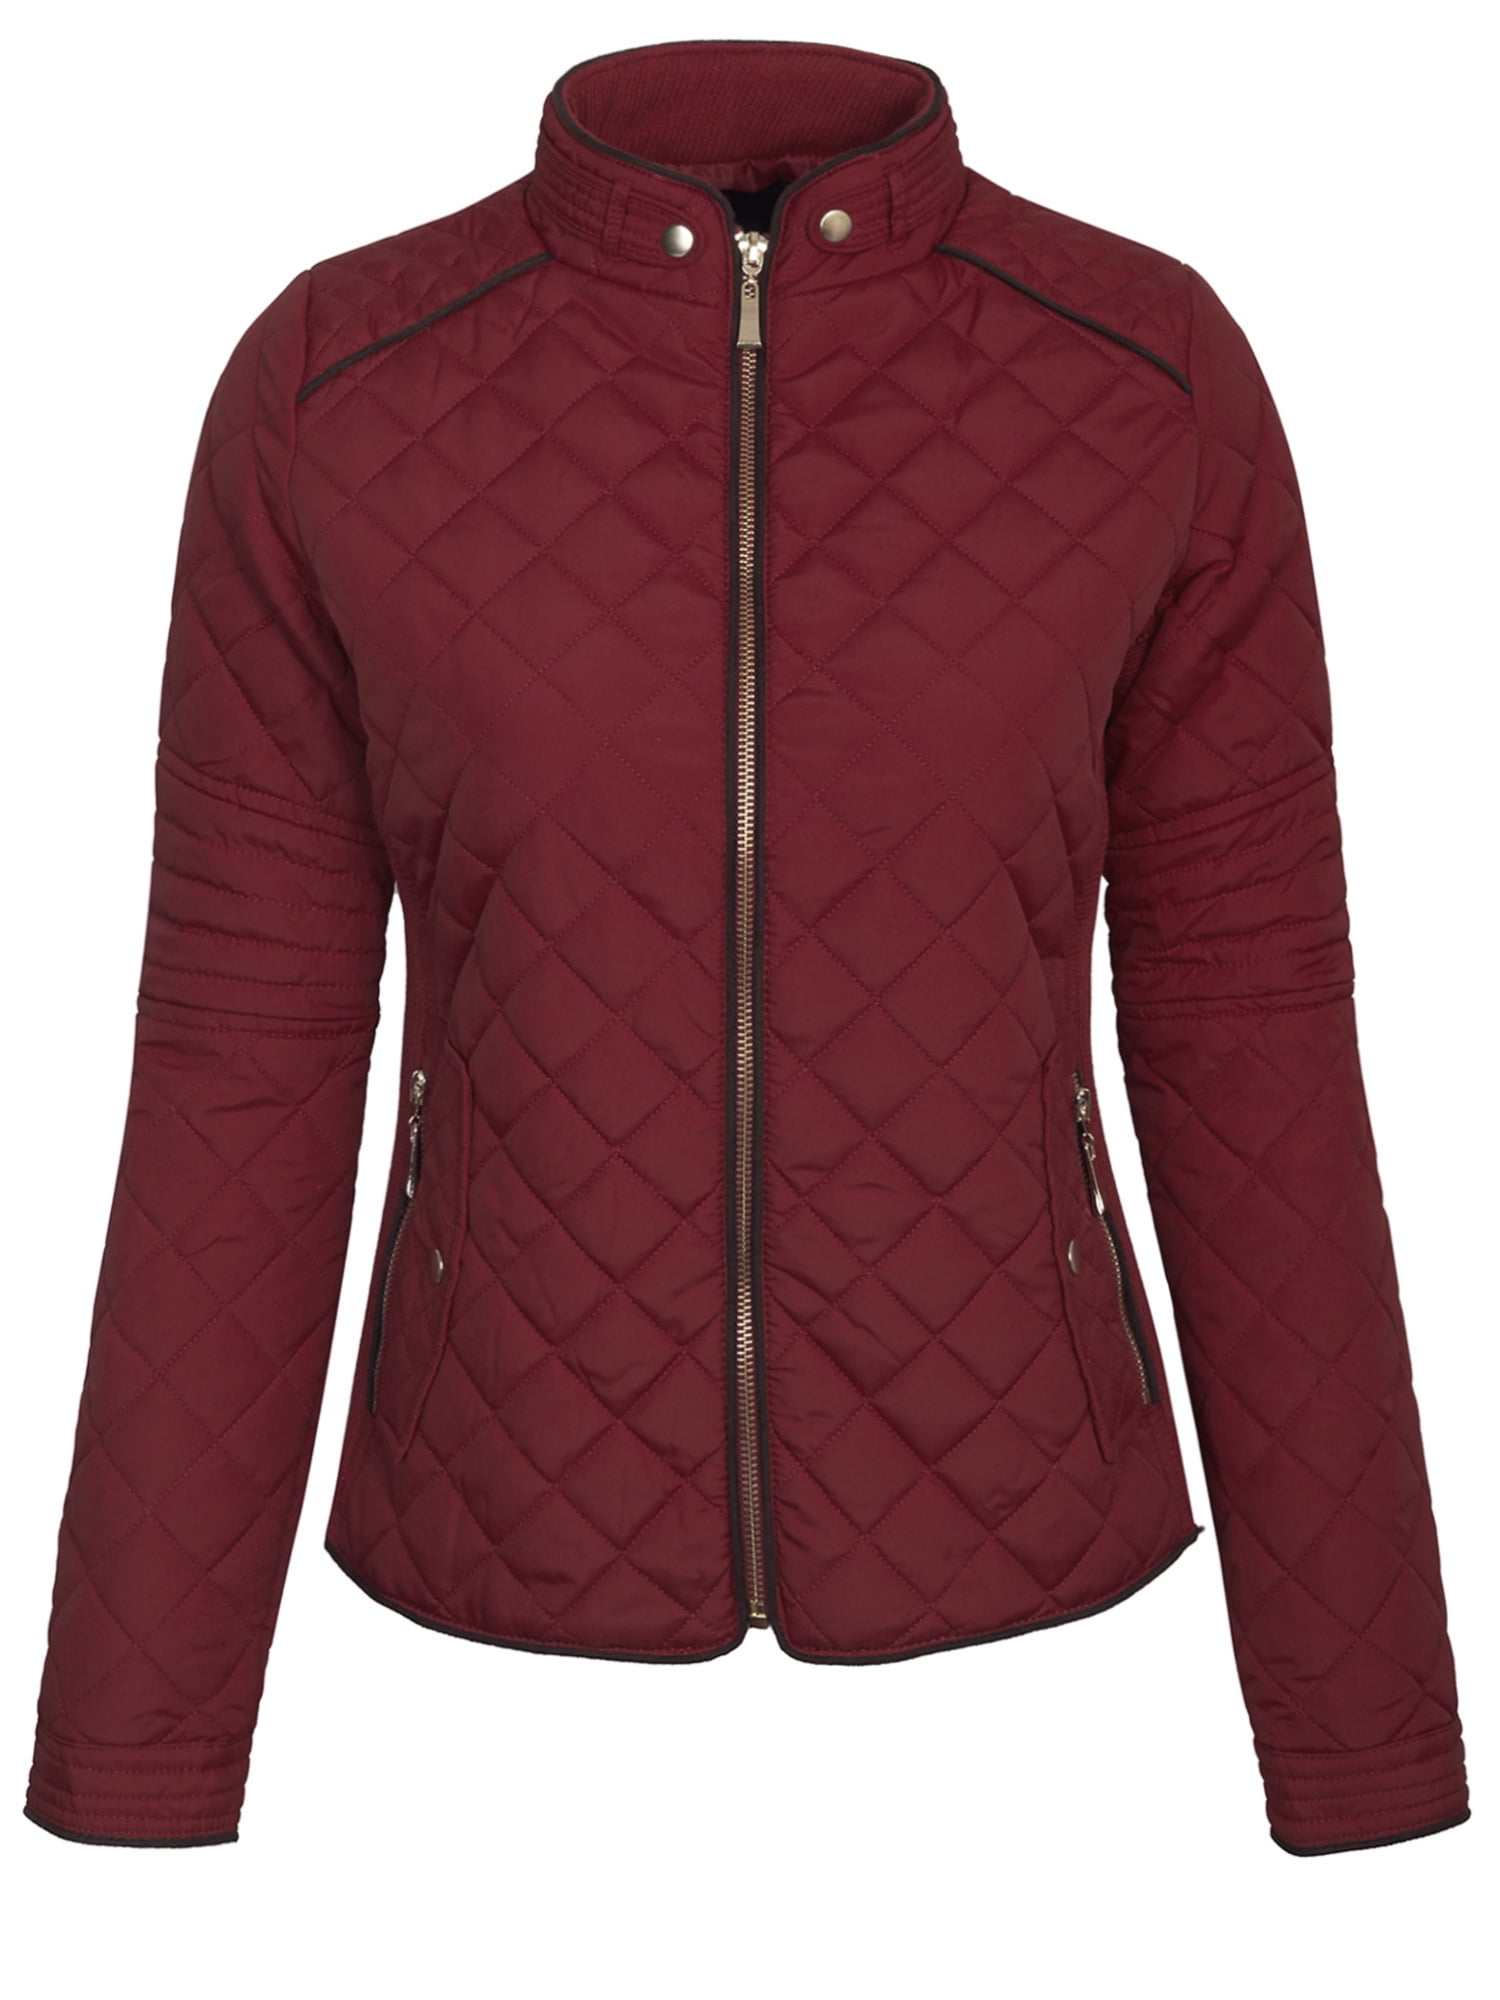 KOGMO Womens Quilted Jacket Fully Lined Lightweight Zip Up Jacket S-3X ...